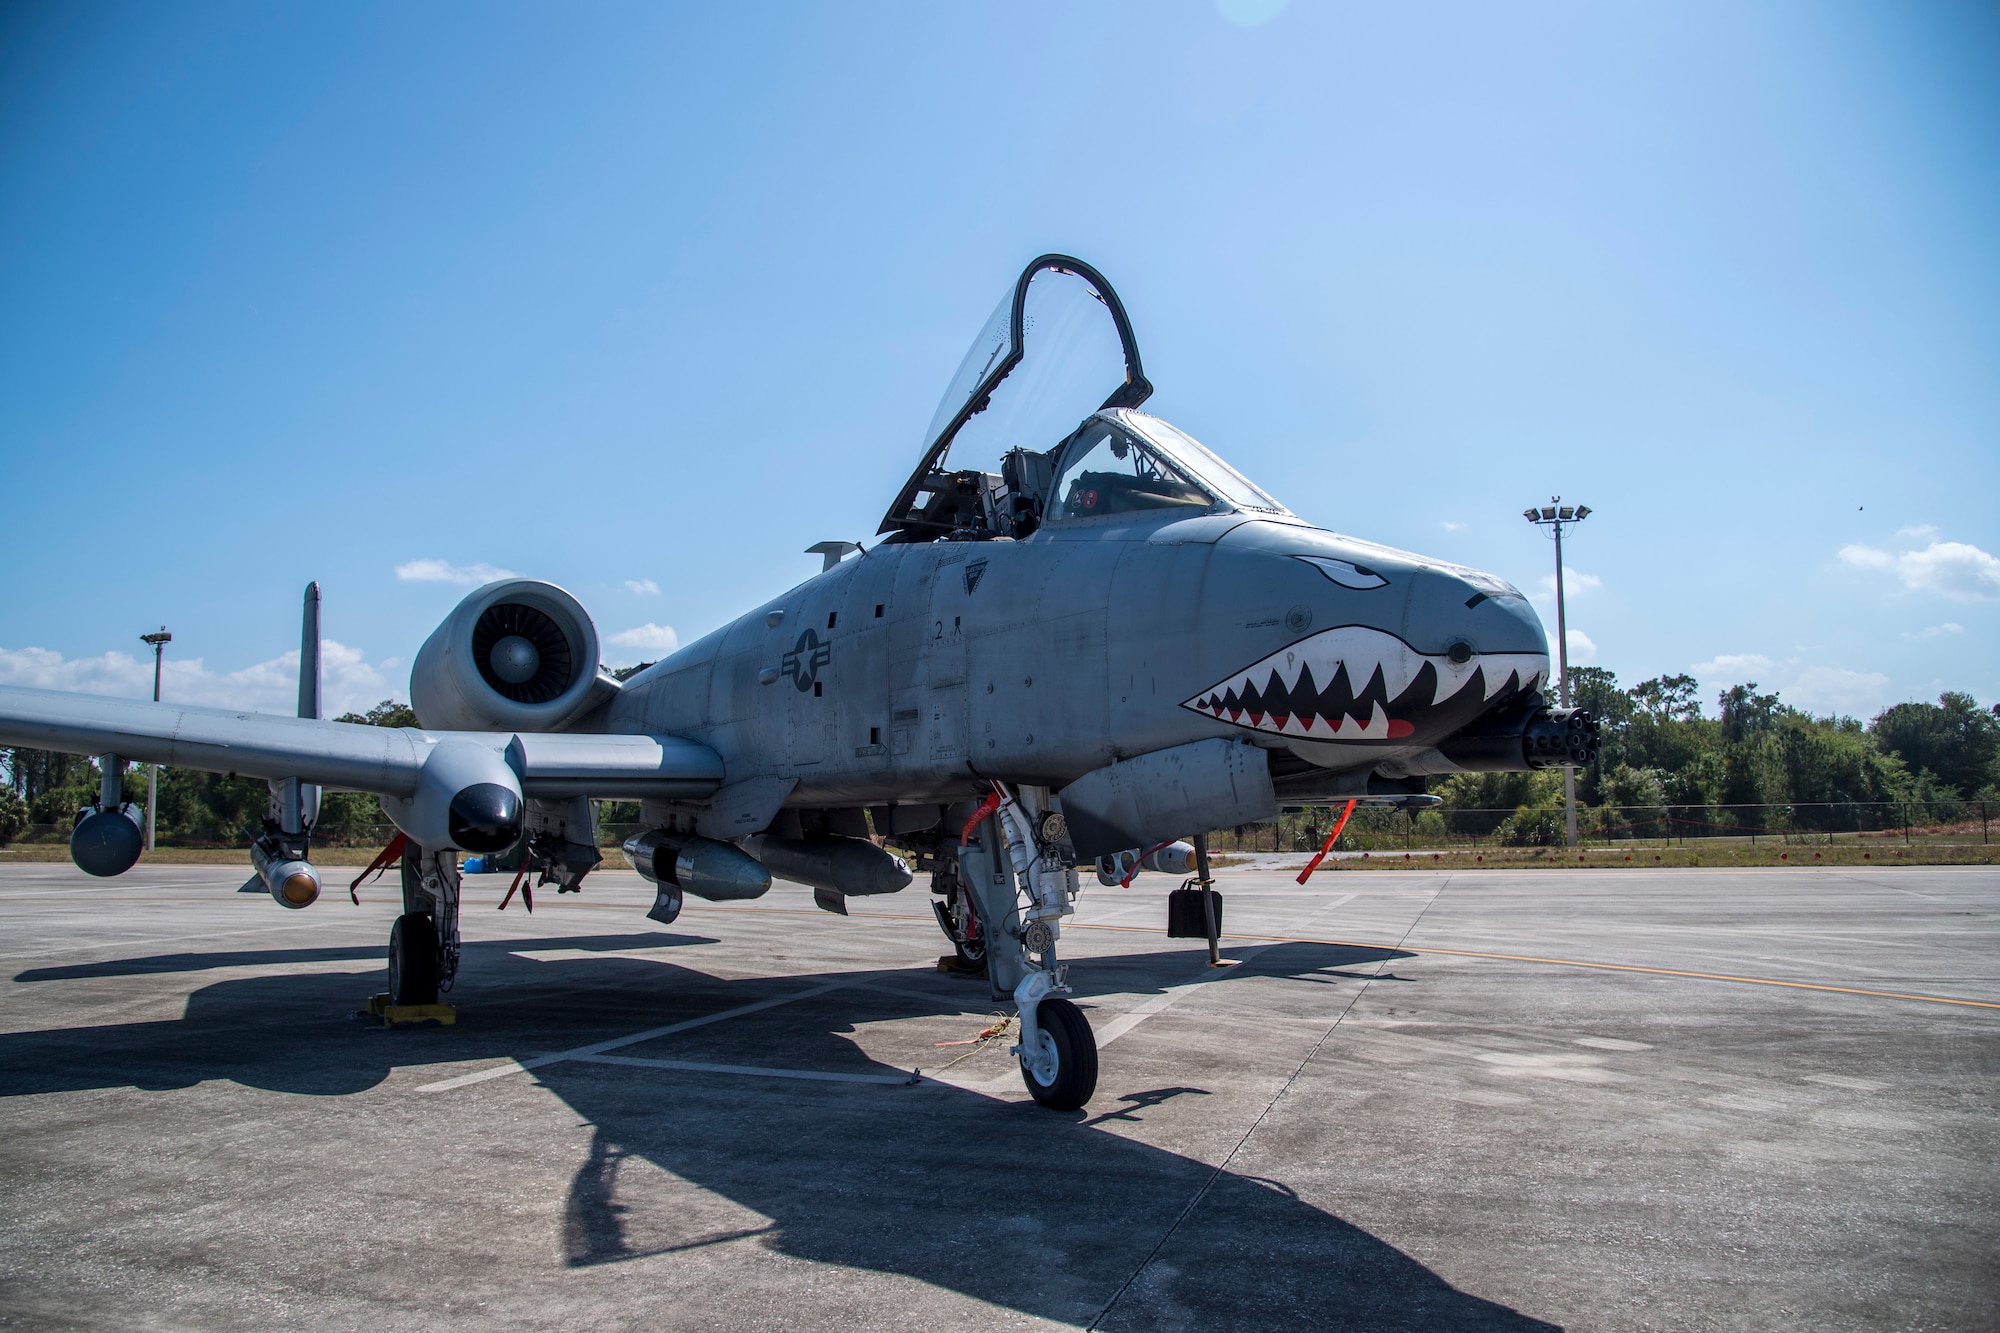 An A-10C Thunderbolt II aircraft assigned to the 74th Fighter Squadron, awaits inspection on the flightline during an agile combat employment exercise, March 18, 2021, at MacDill Air Force Base, Fla.